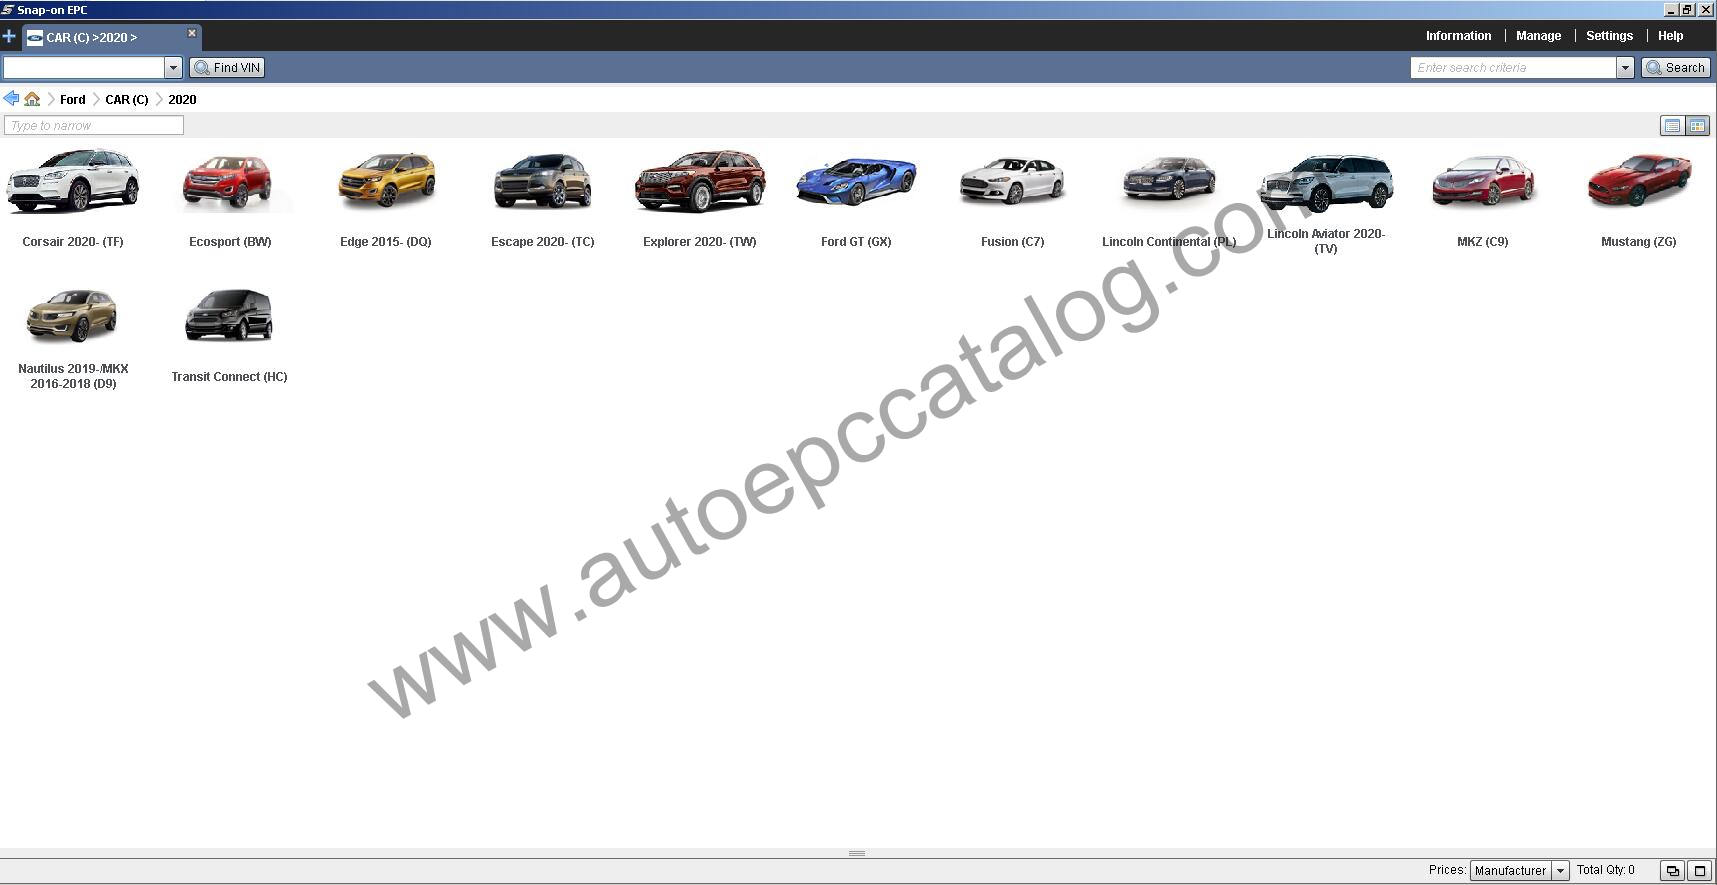 09.2020 Microcat & Snap-on Ford EPC (2)